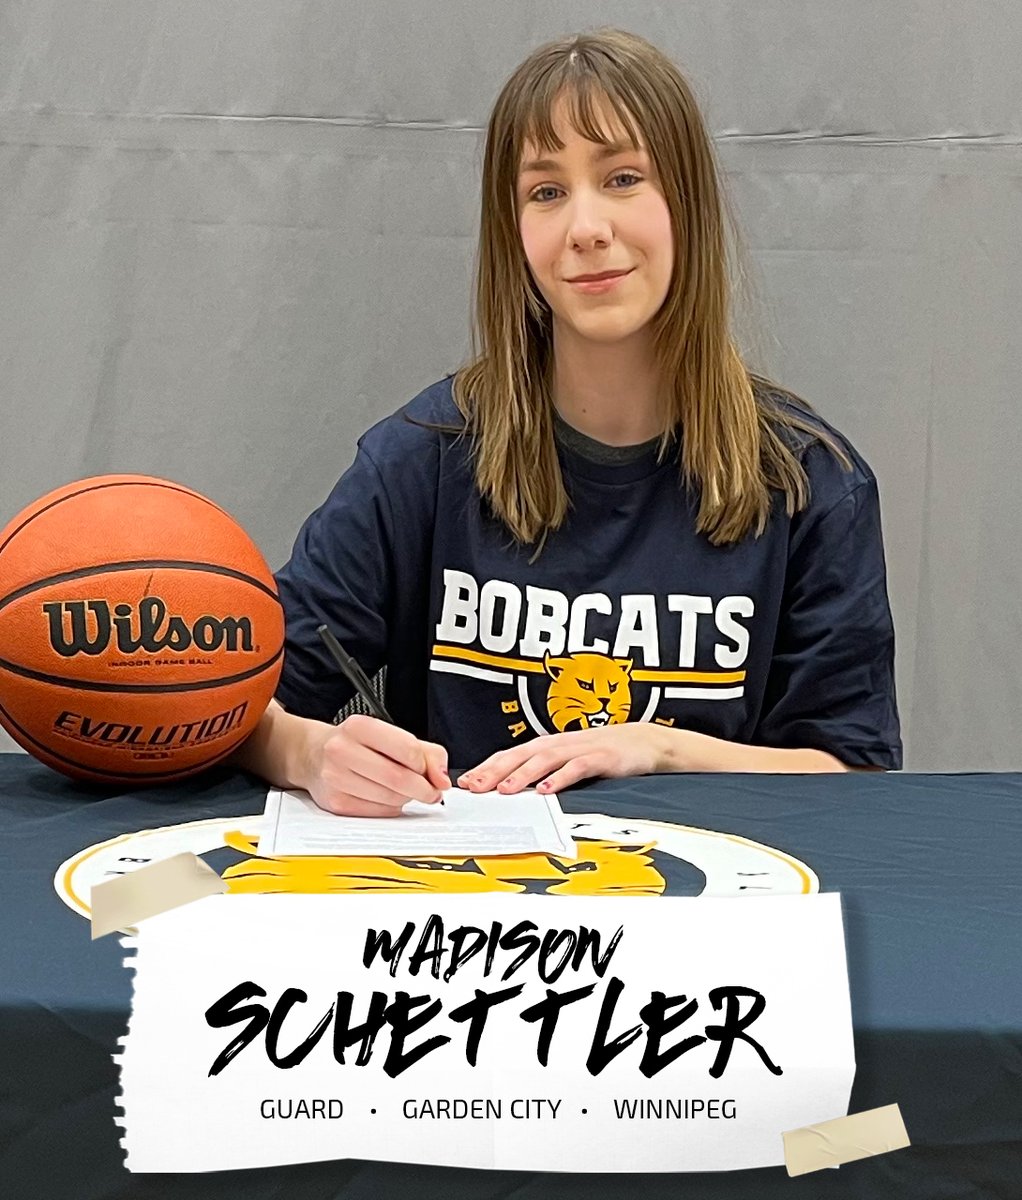 A multi-sport star that was a AAAA graduating all-star and ranked in the Free Press top 10. 

We're thrilled to welcome Garden City guard Madison Schettler to Bobcat Nation.

#bdnmb #BobcatNation